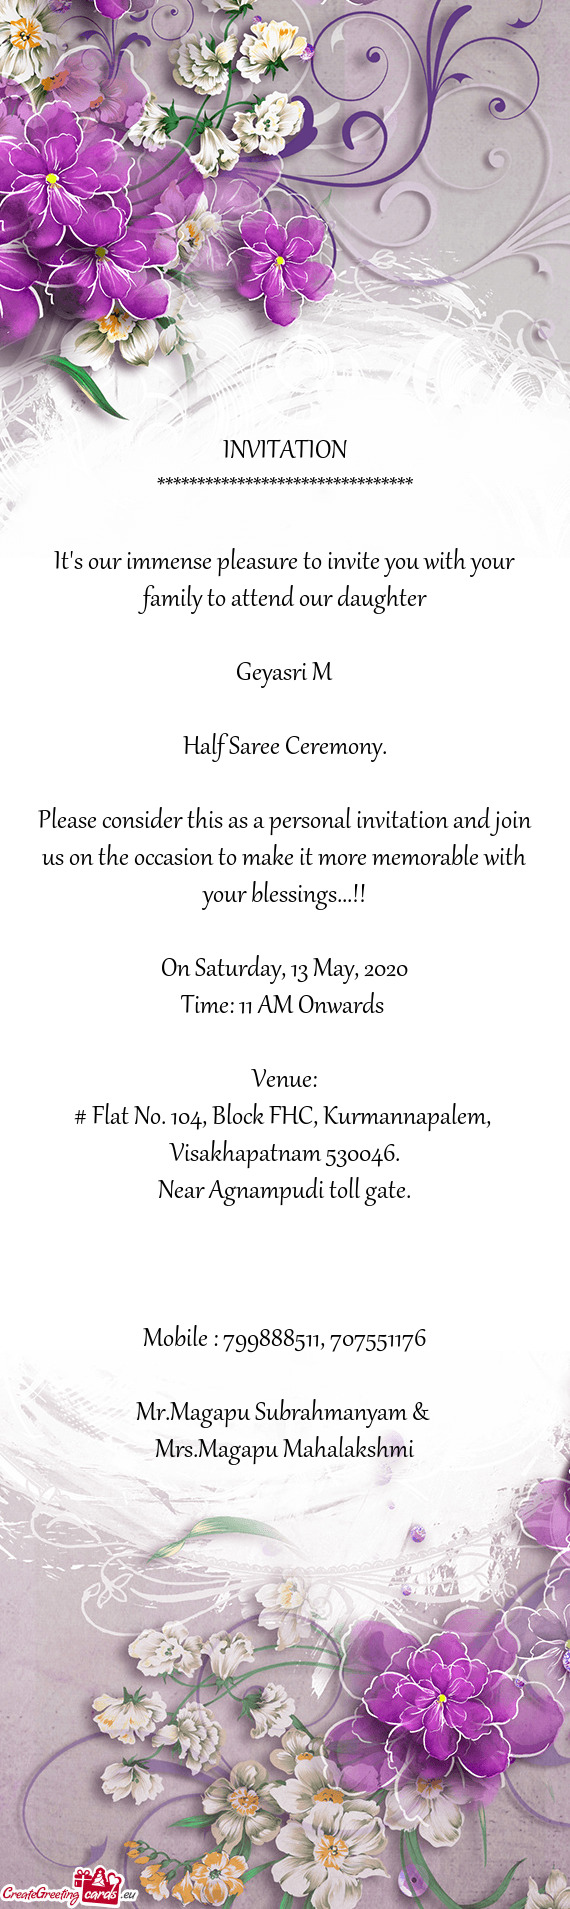 Please consider this as a personal invitation and join us on the occasion to make it more memorable